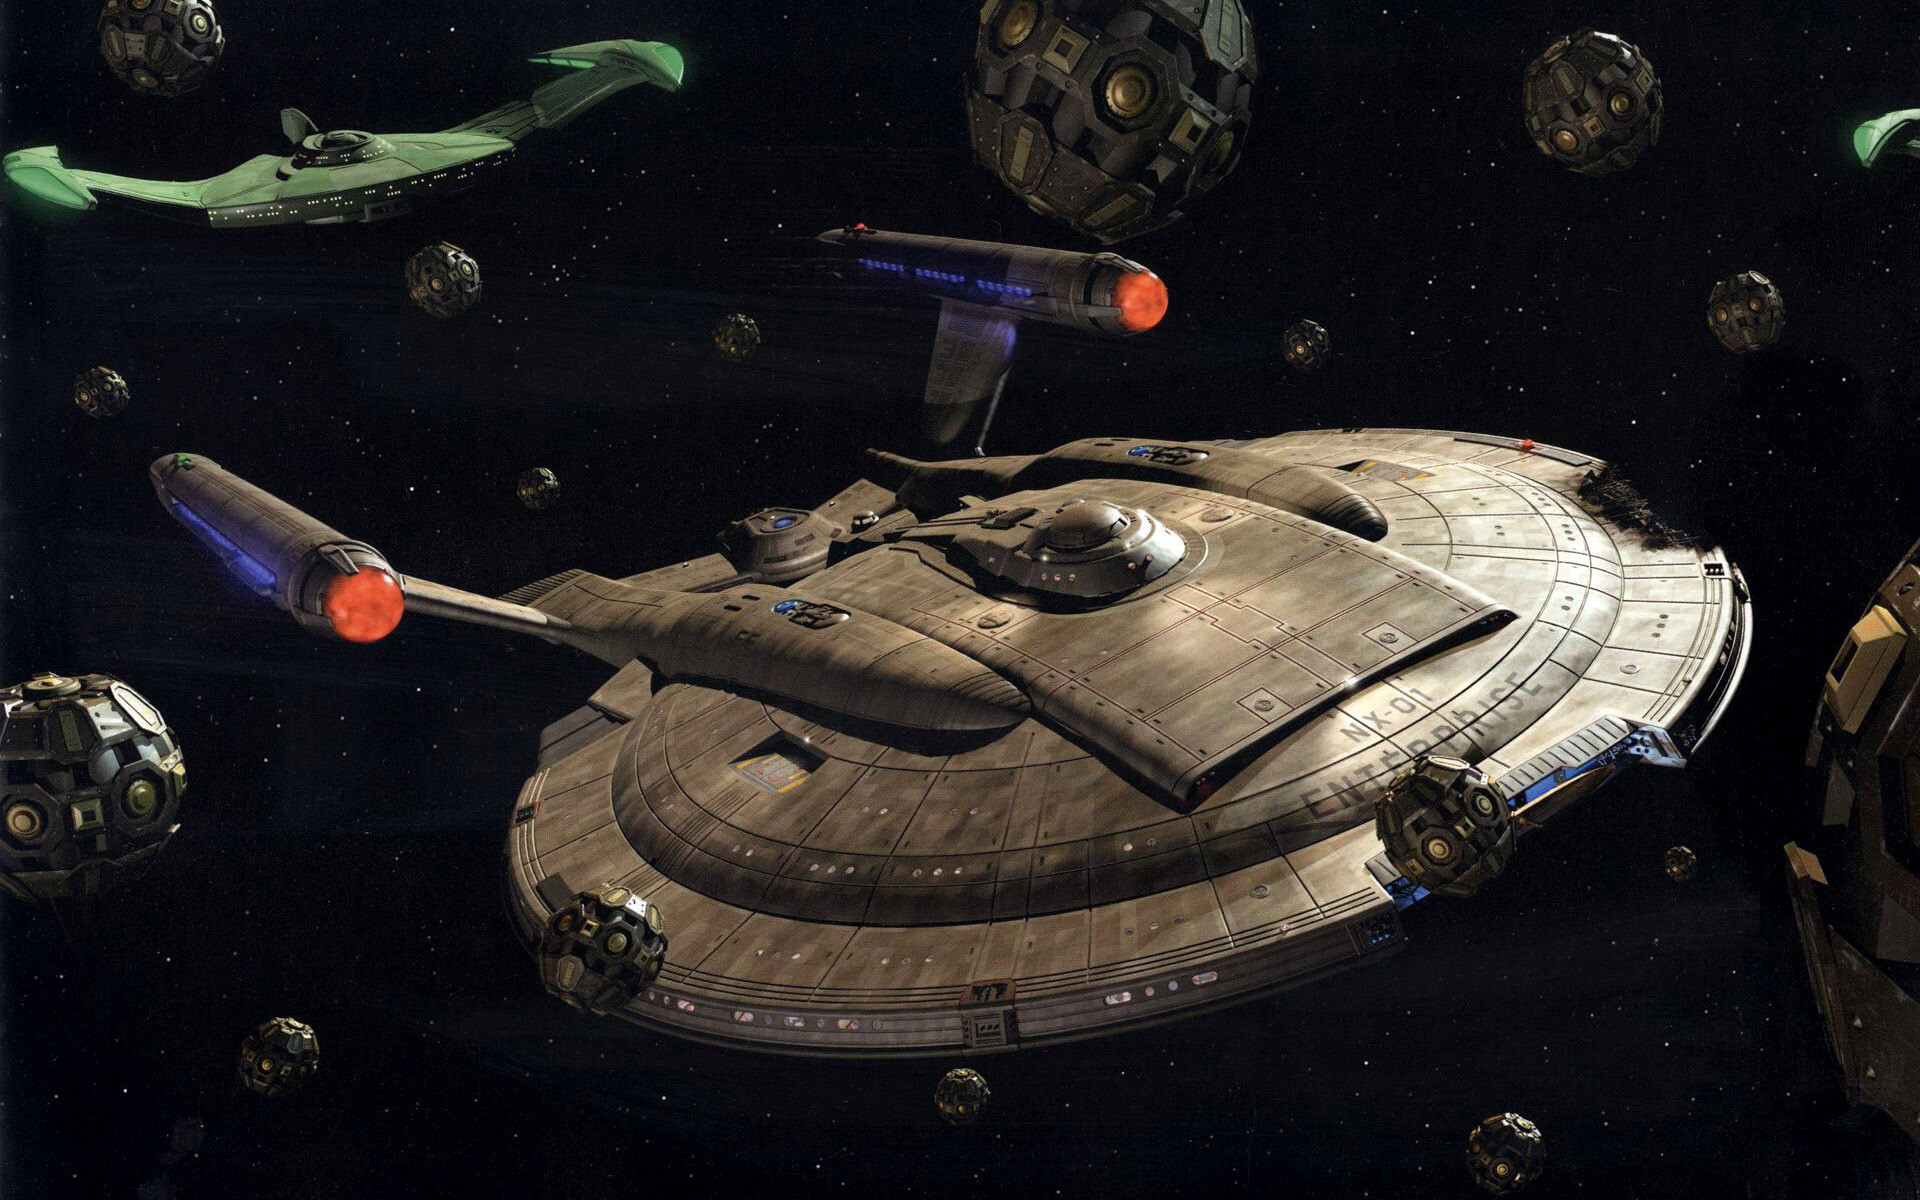 Star Trek: Enterprise NX-01 is a fictional spaceship that appears in the American science fiction television series Star Trek: Enterprise. 1920x1200 HD Background.